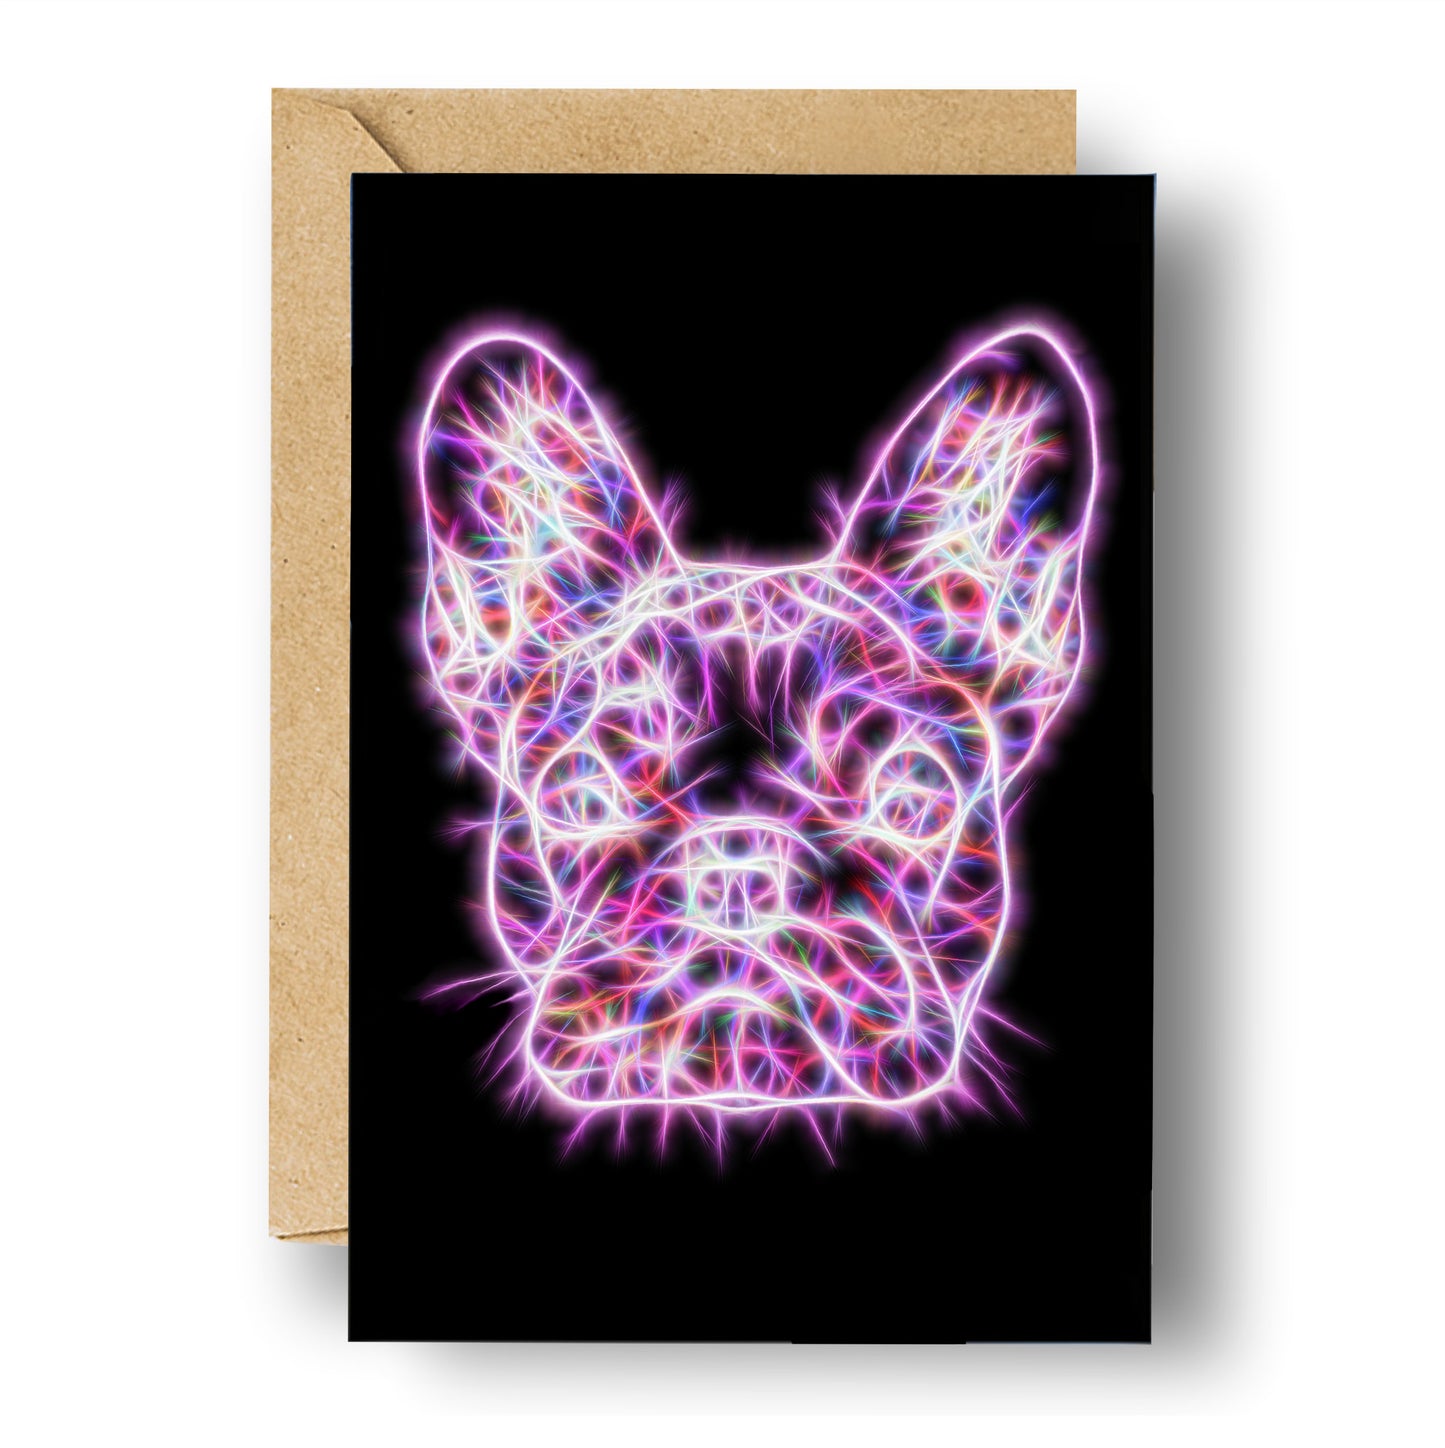 French Bulldog Greeting Card Blank Inside for Birthdays or any other Occasion